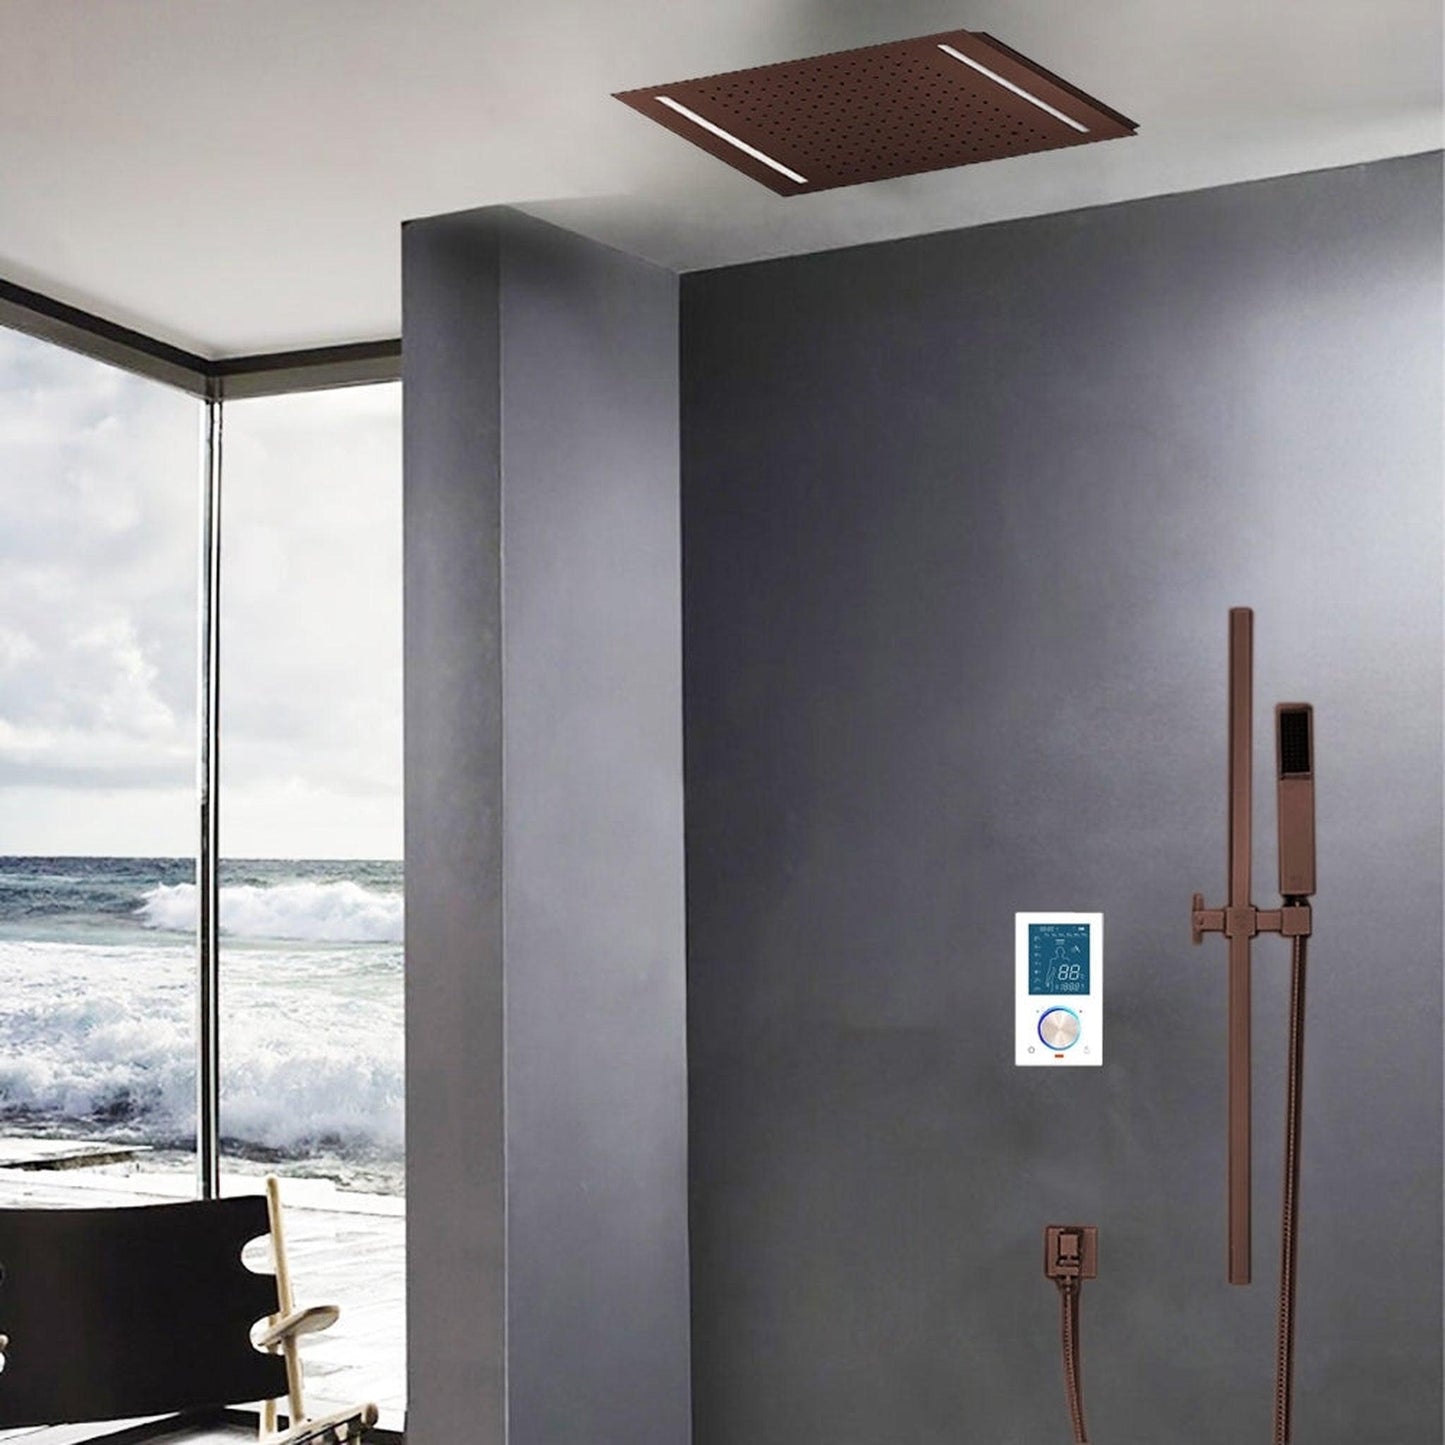 Fontana Creative Luxury Light Oil Rubbed Bronze Rectangular Ceiling Mounted Rainfall Smart Shower System With LED Touch Control and Hand Shower